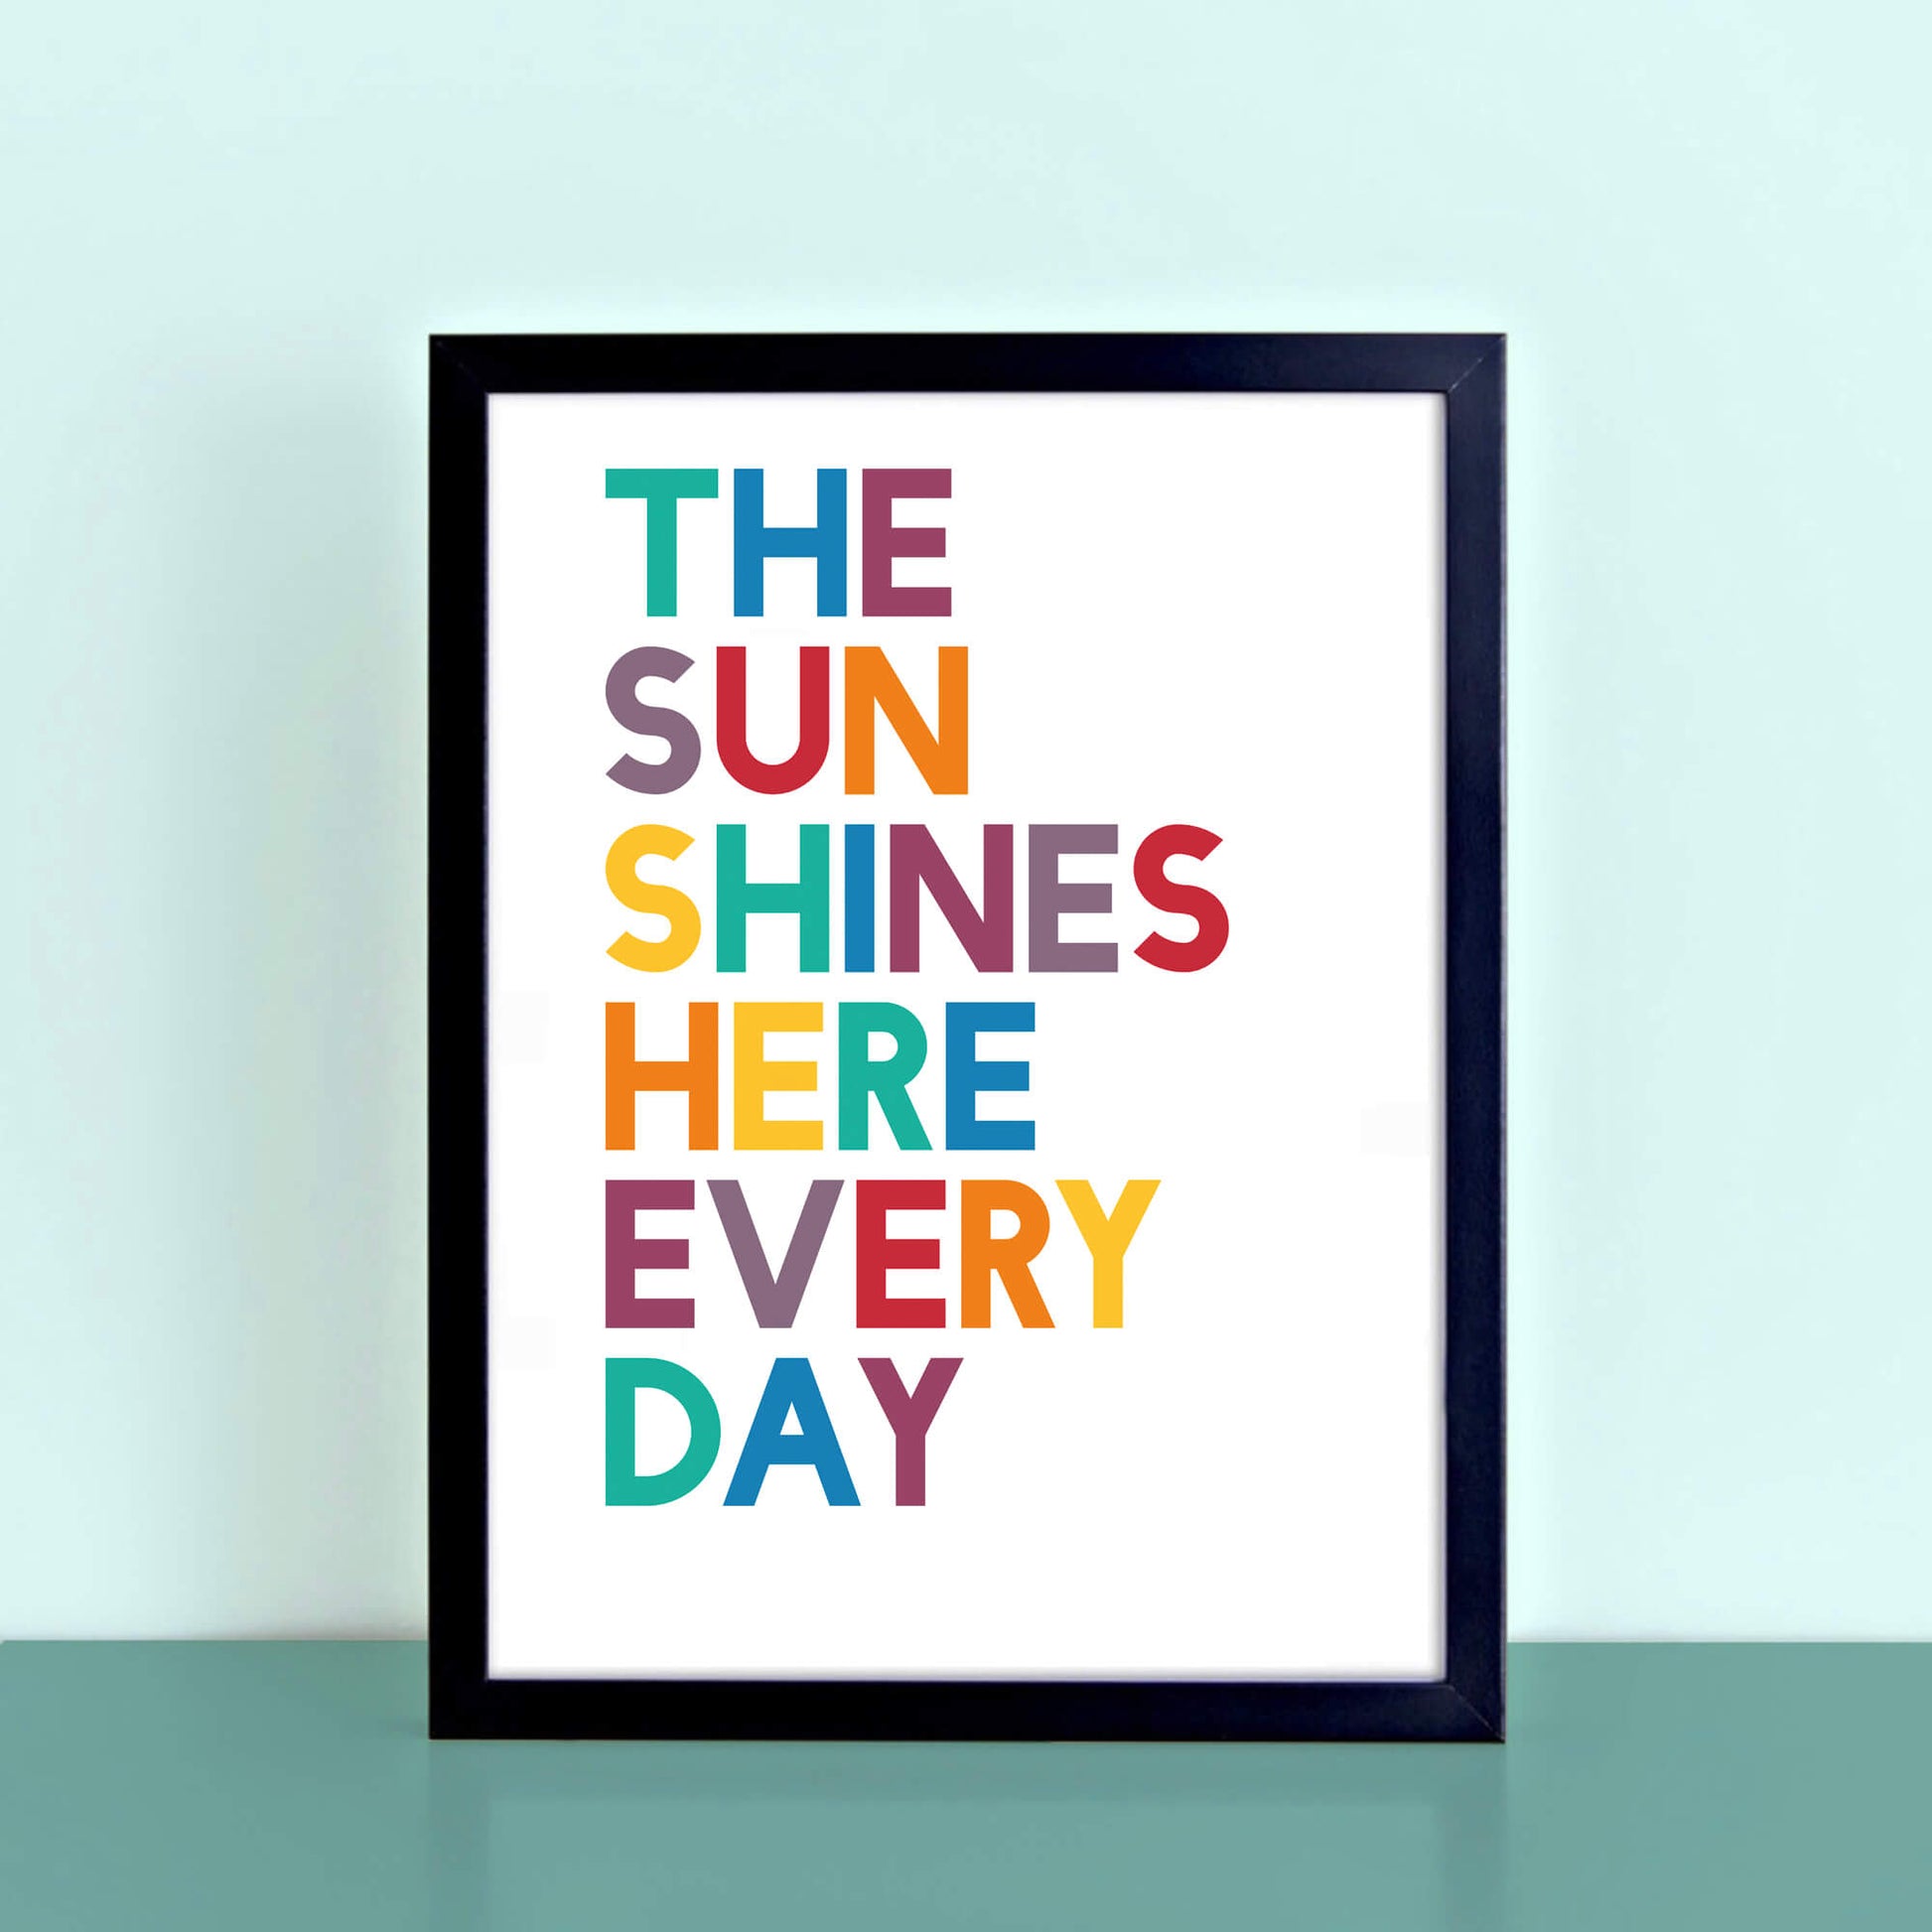 The Sun Shines Here Every Day by SixElevenCreations. Product Code SEP0204